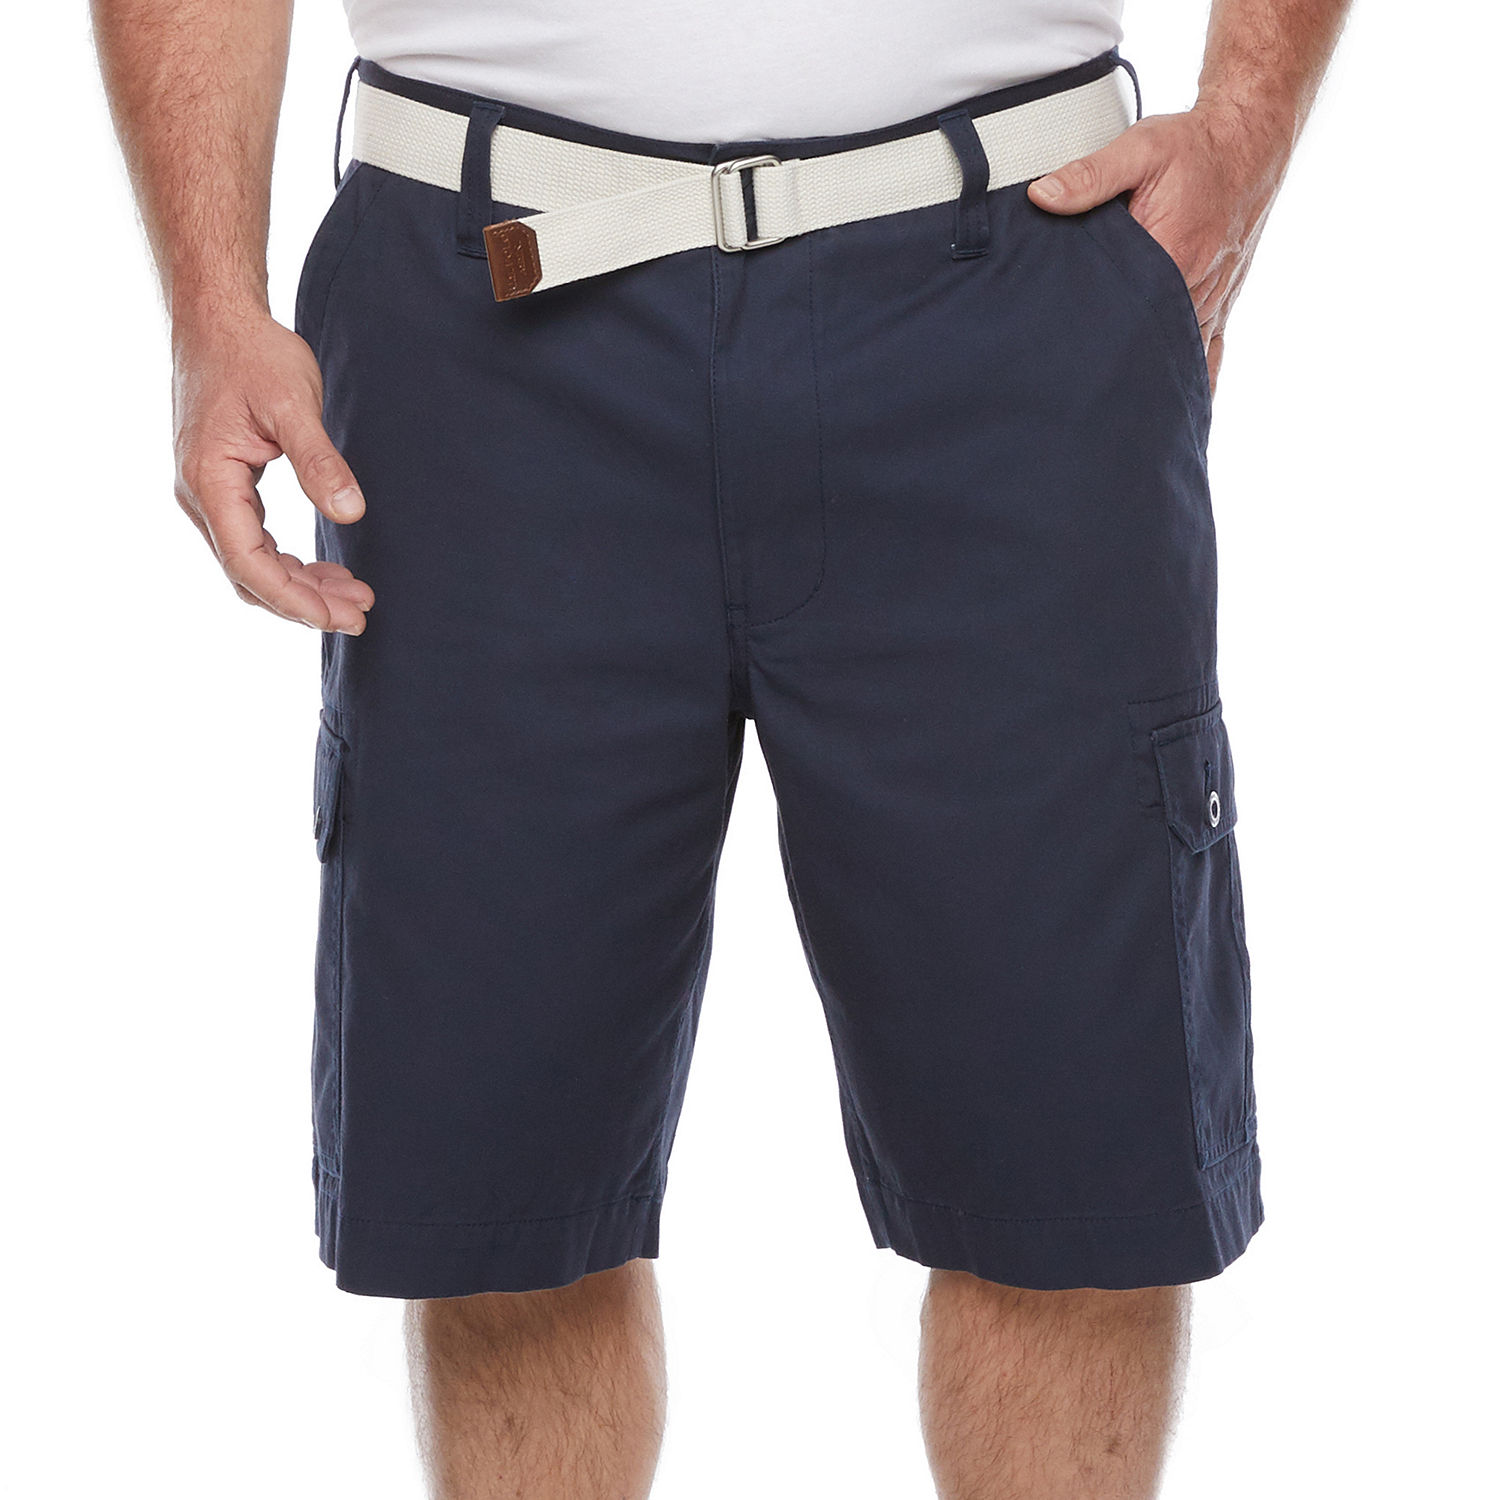 U.S. Polo Assn. Mens Big and Tall Cargo Shorts, Color: Club Navy - JCPenney